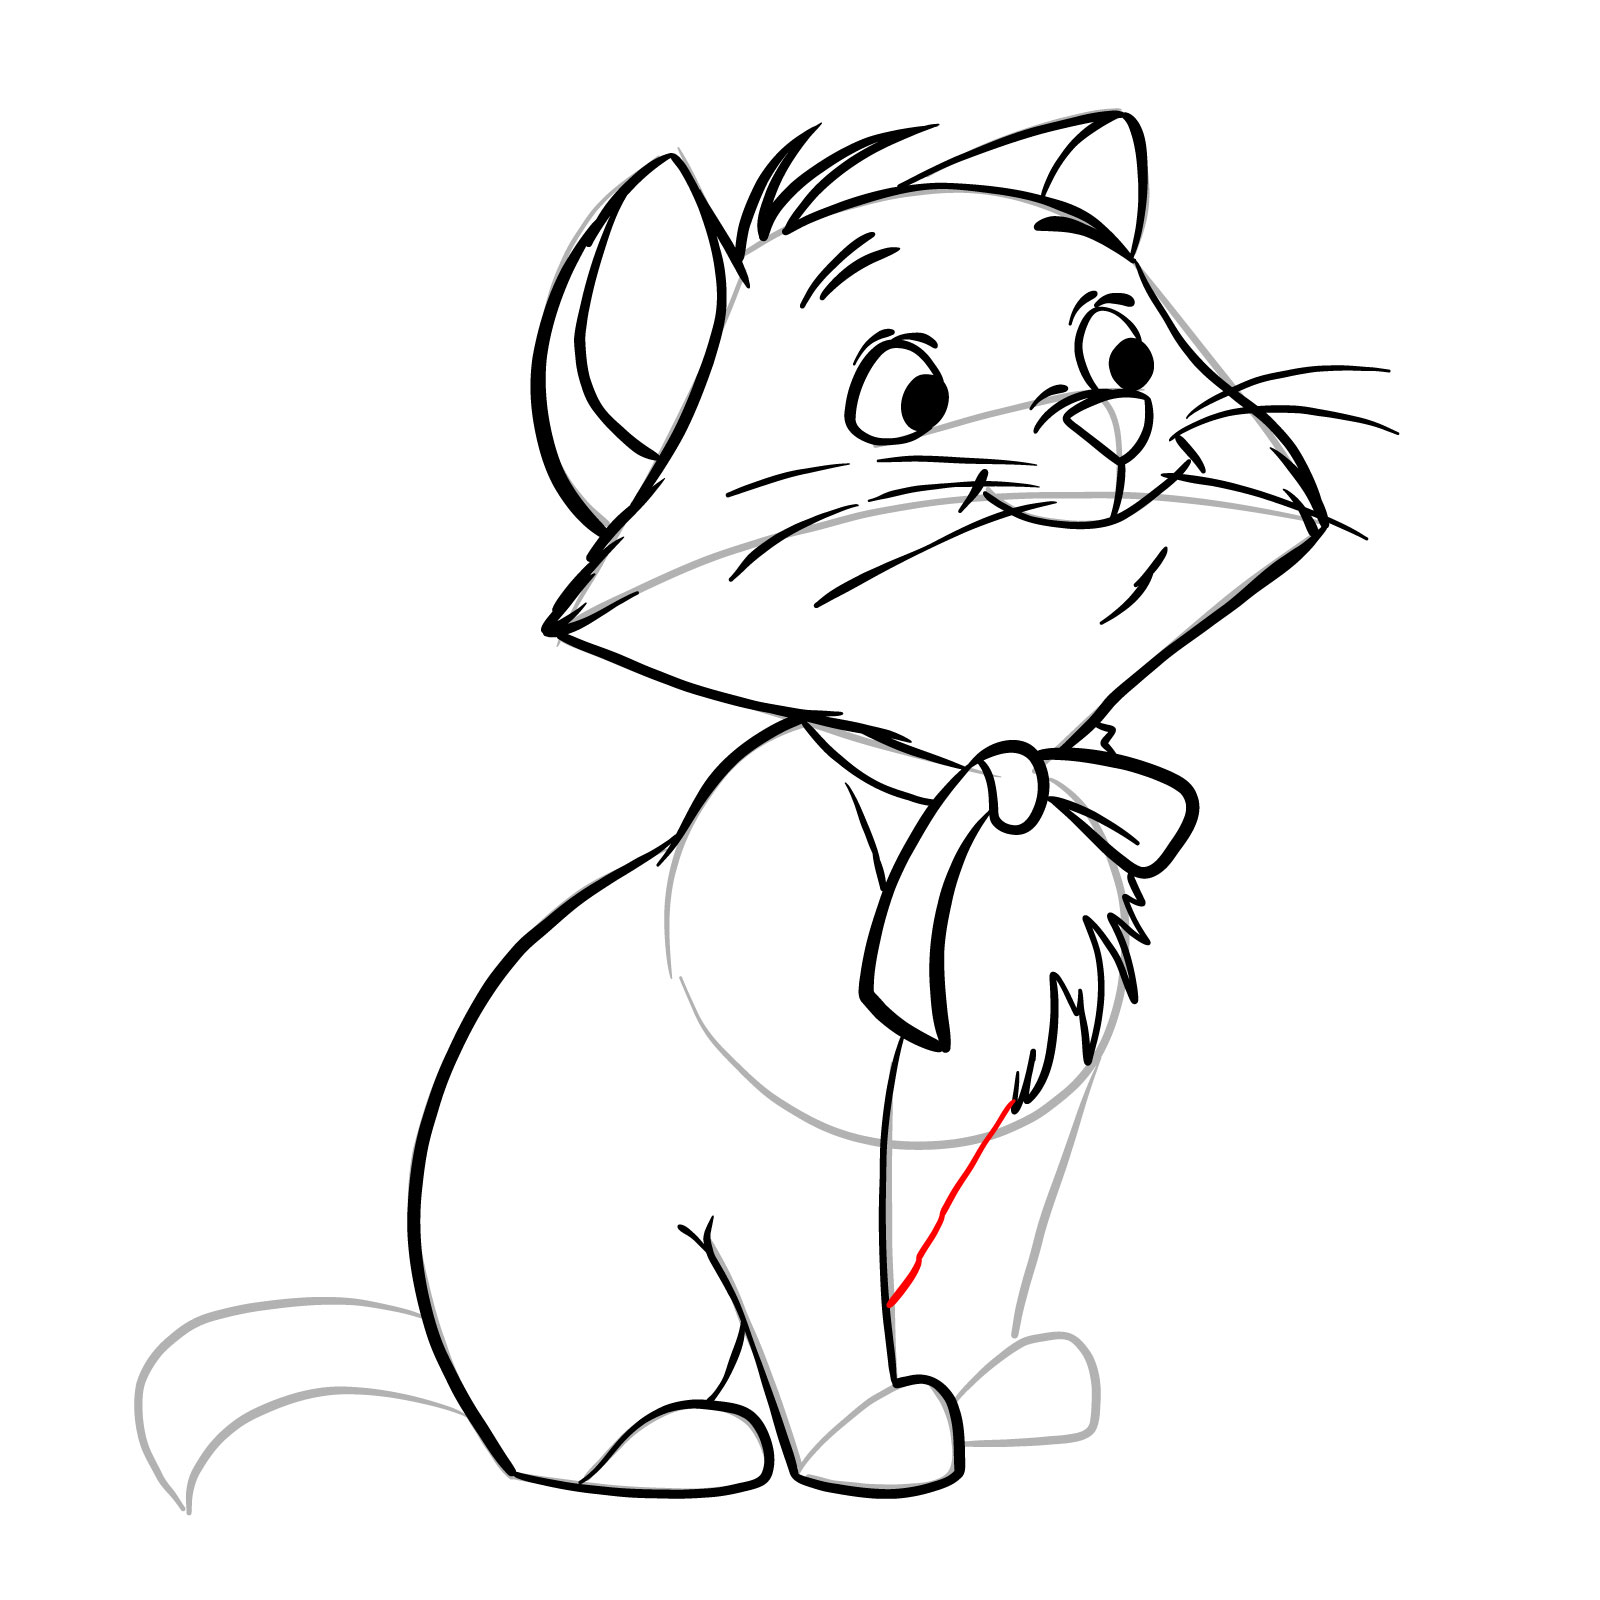 How to draw Berlioz from The Aristocats - step 21